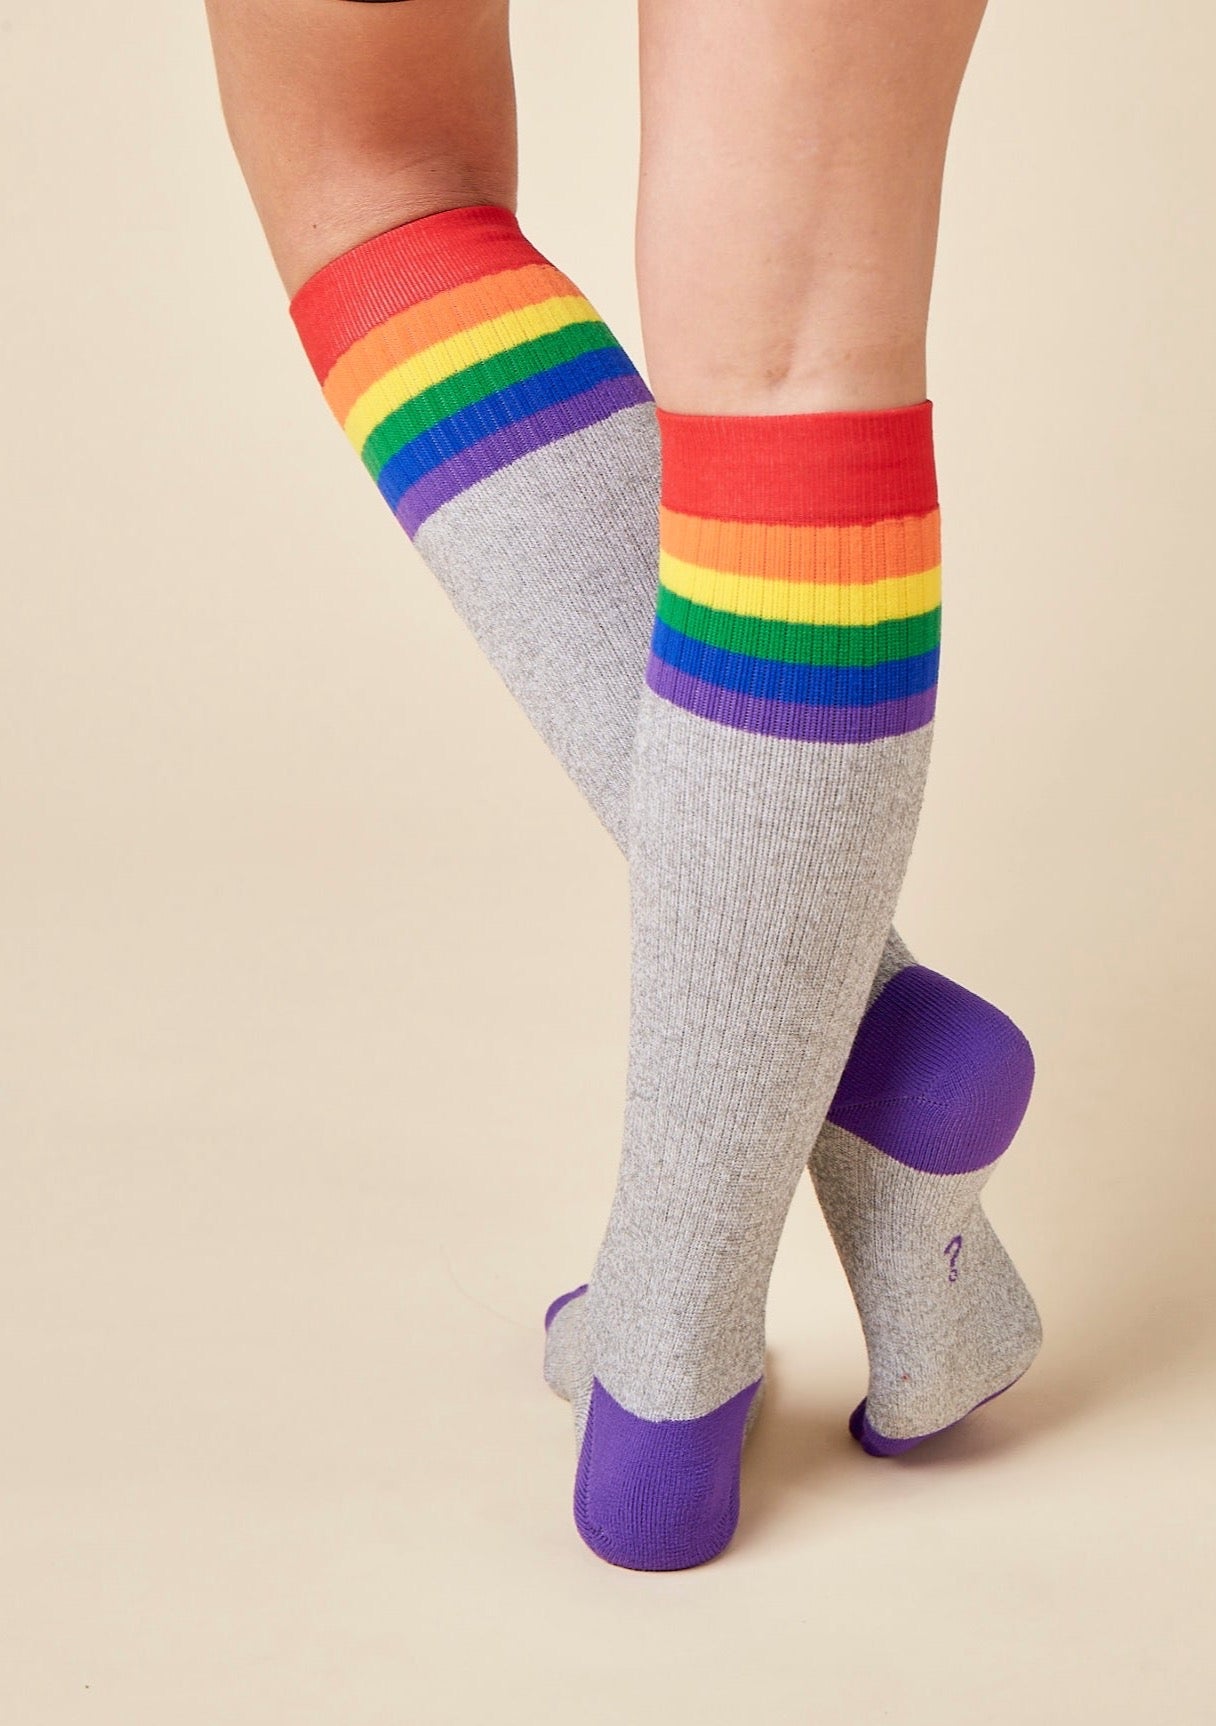 TheRY Comforter rainbow compression socks 15-20mmHg for swollen feet, cankles, travel and hospital - back view